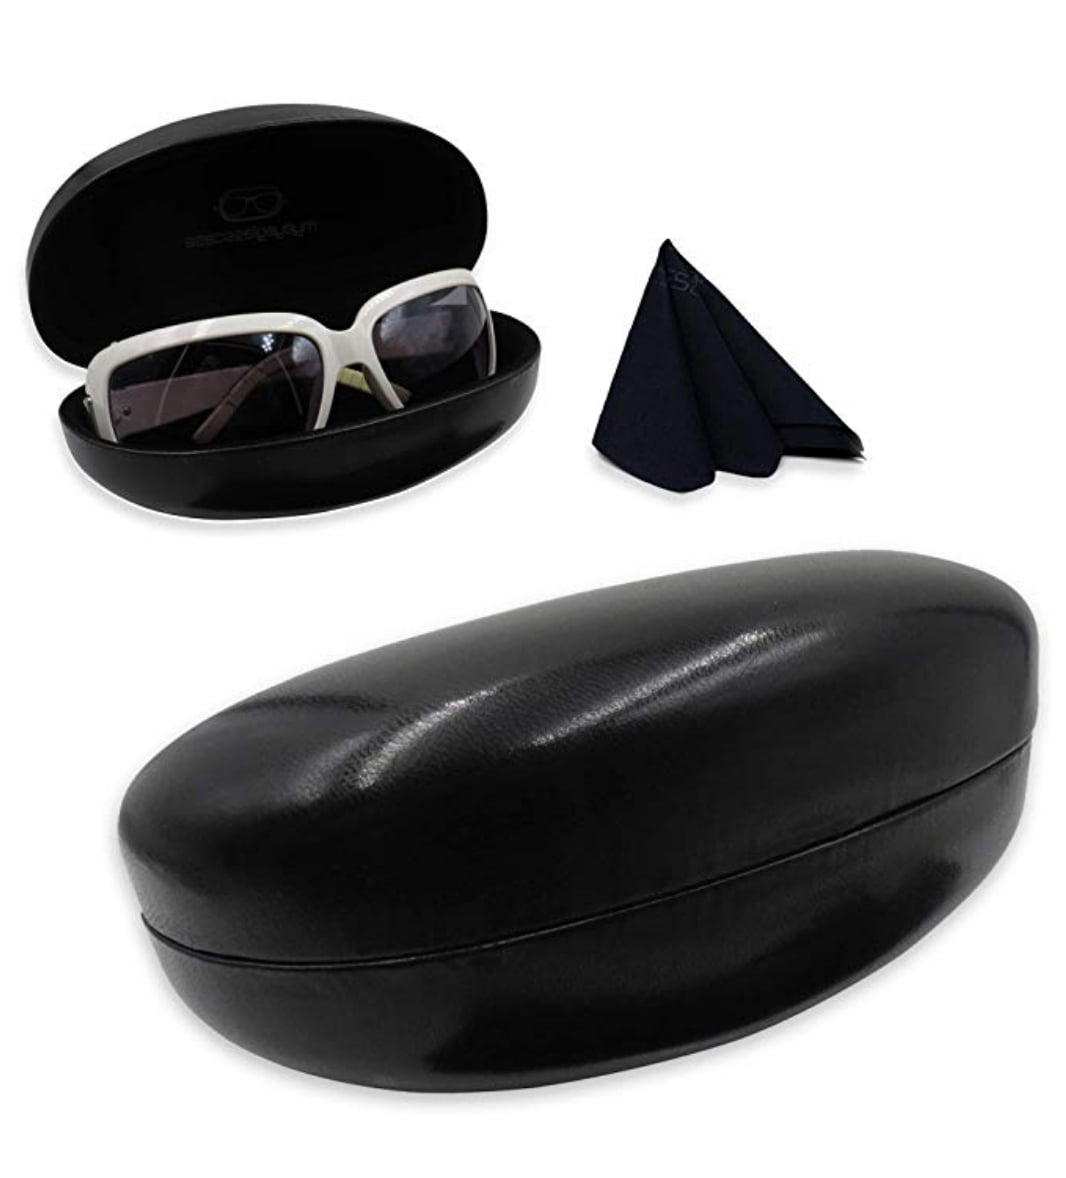 Eyeglasses Hard Case Camo Cool Clamshell Camouflage Military Style Box